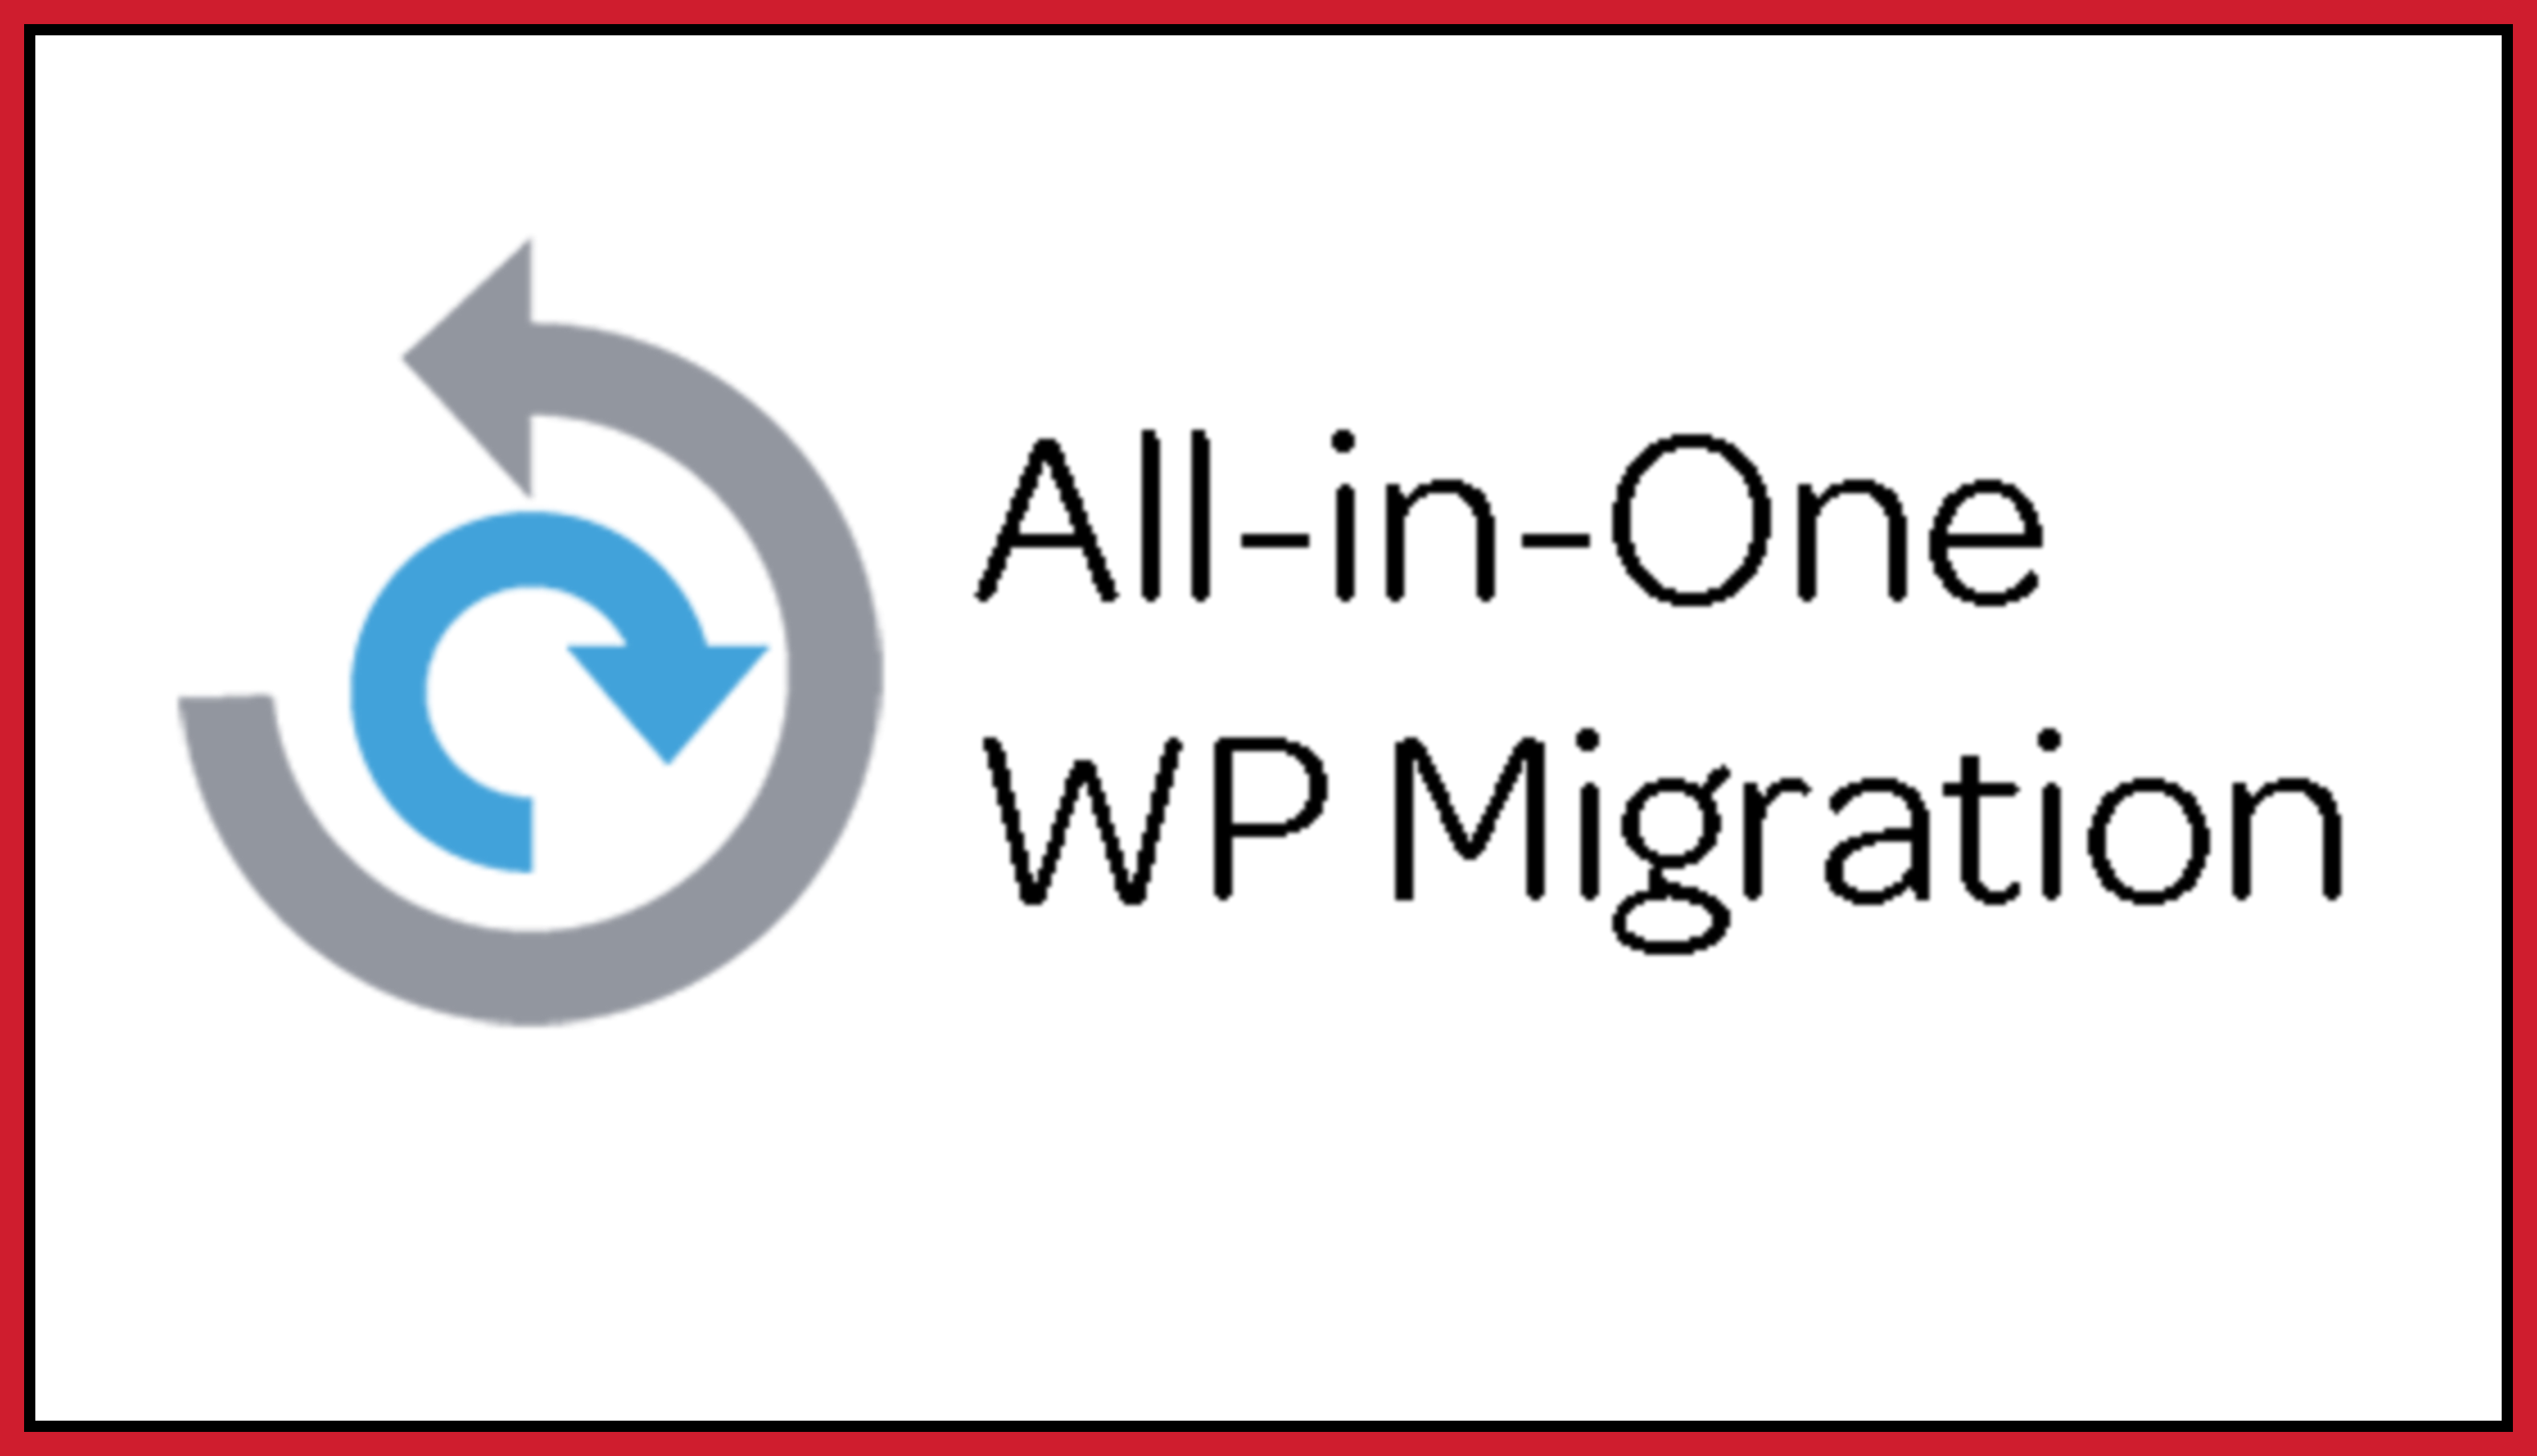 All-in-one migration plugin stats